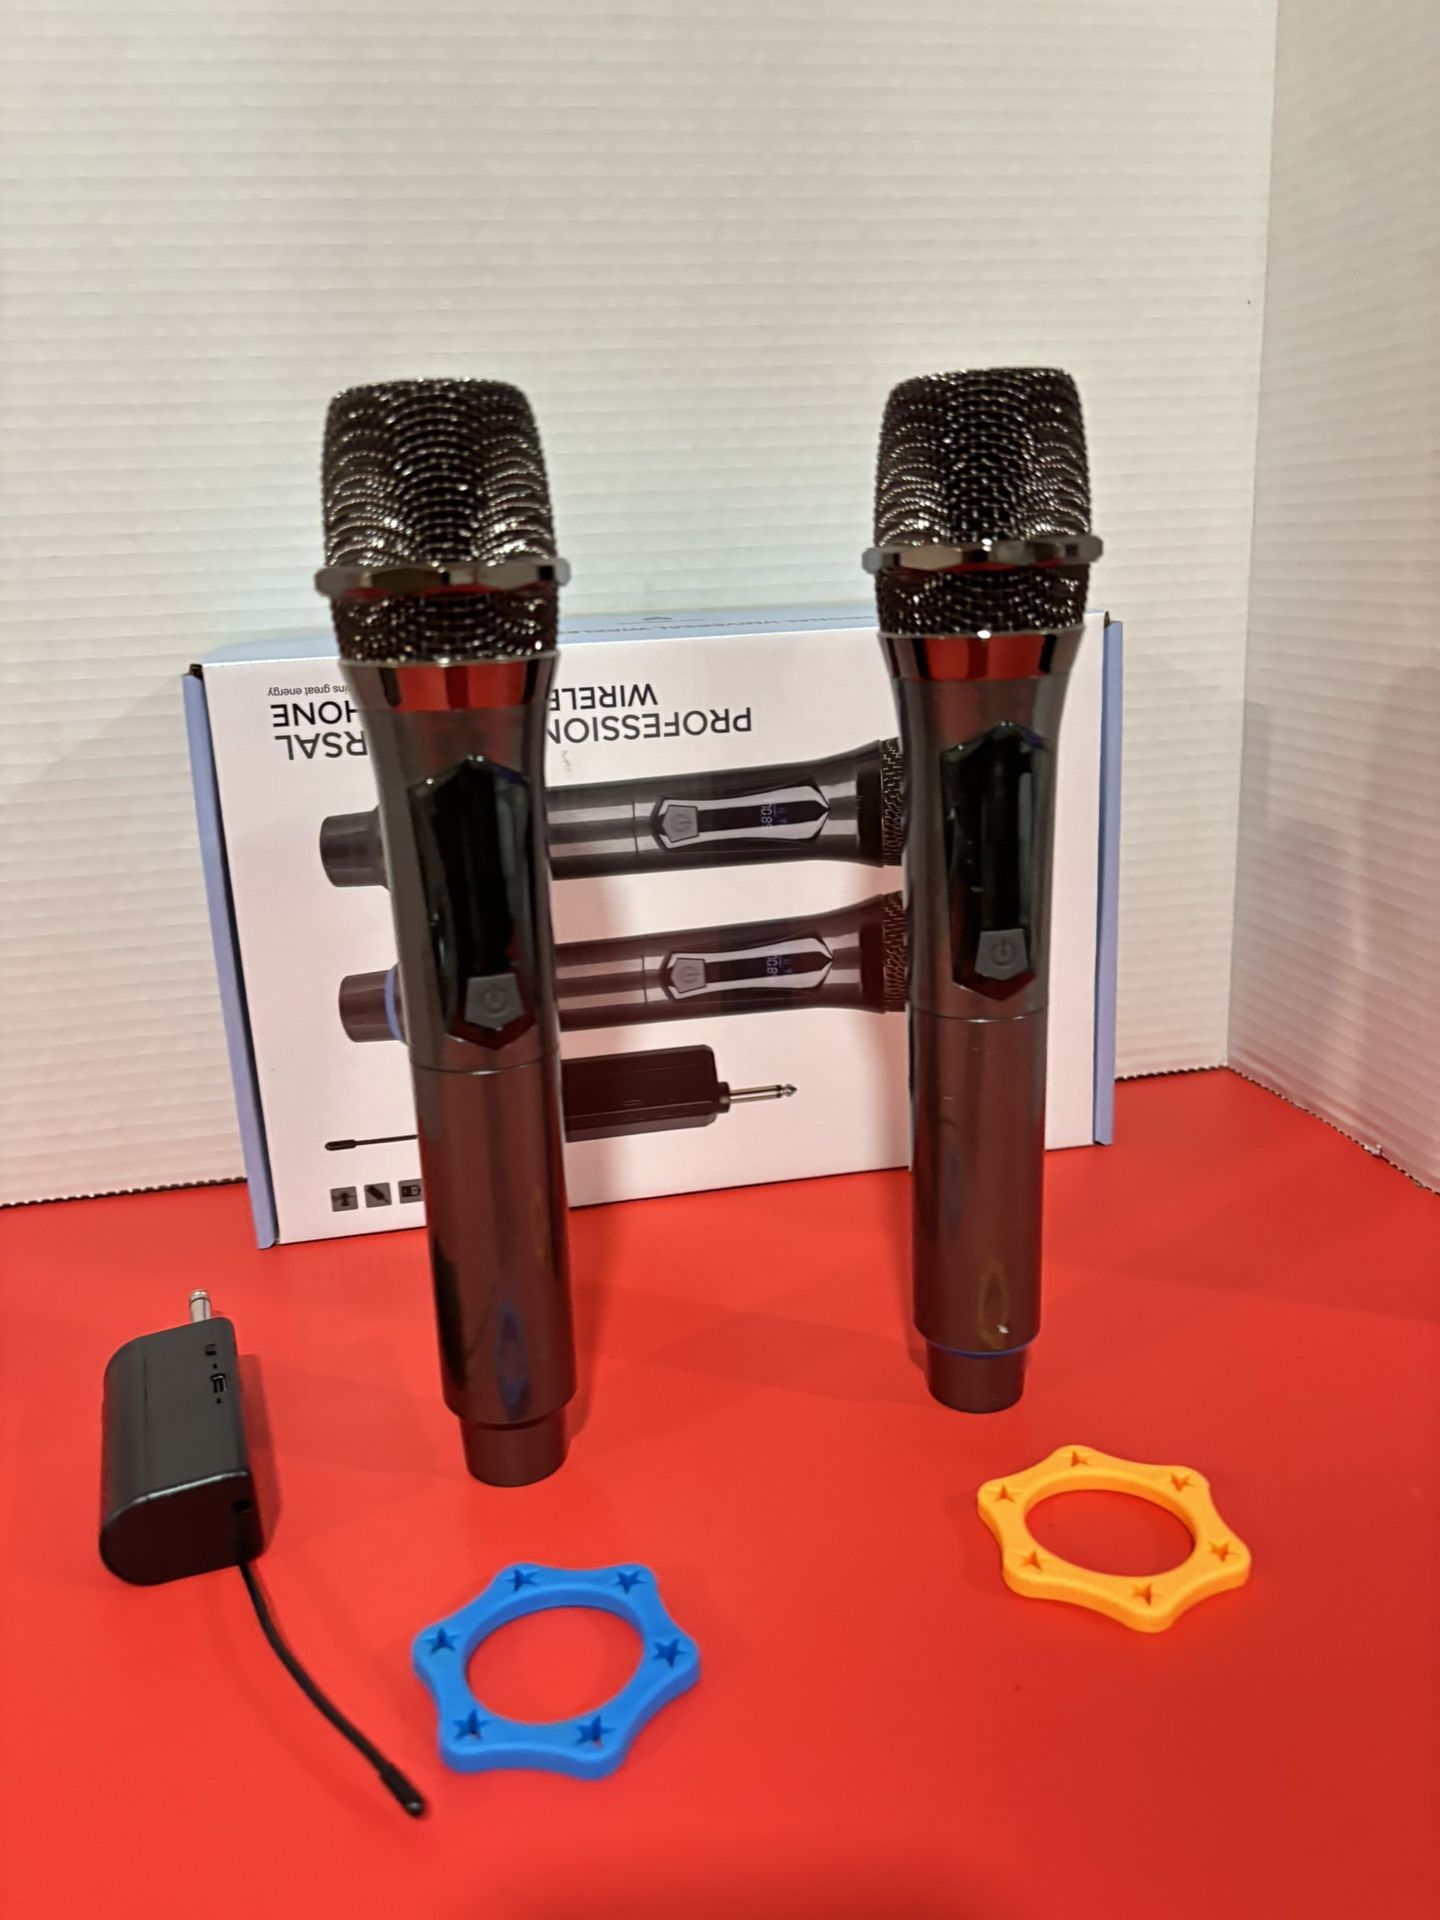 Microphone 🎤 🎤🔋🔌2 Sing Together Wireless 🛜 $50.NEW